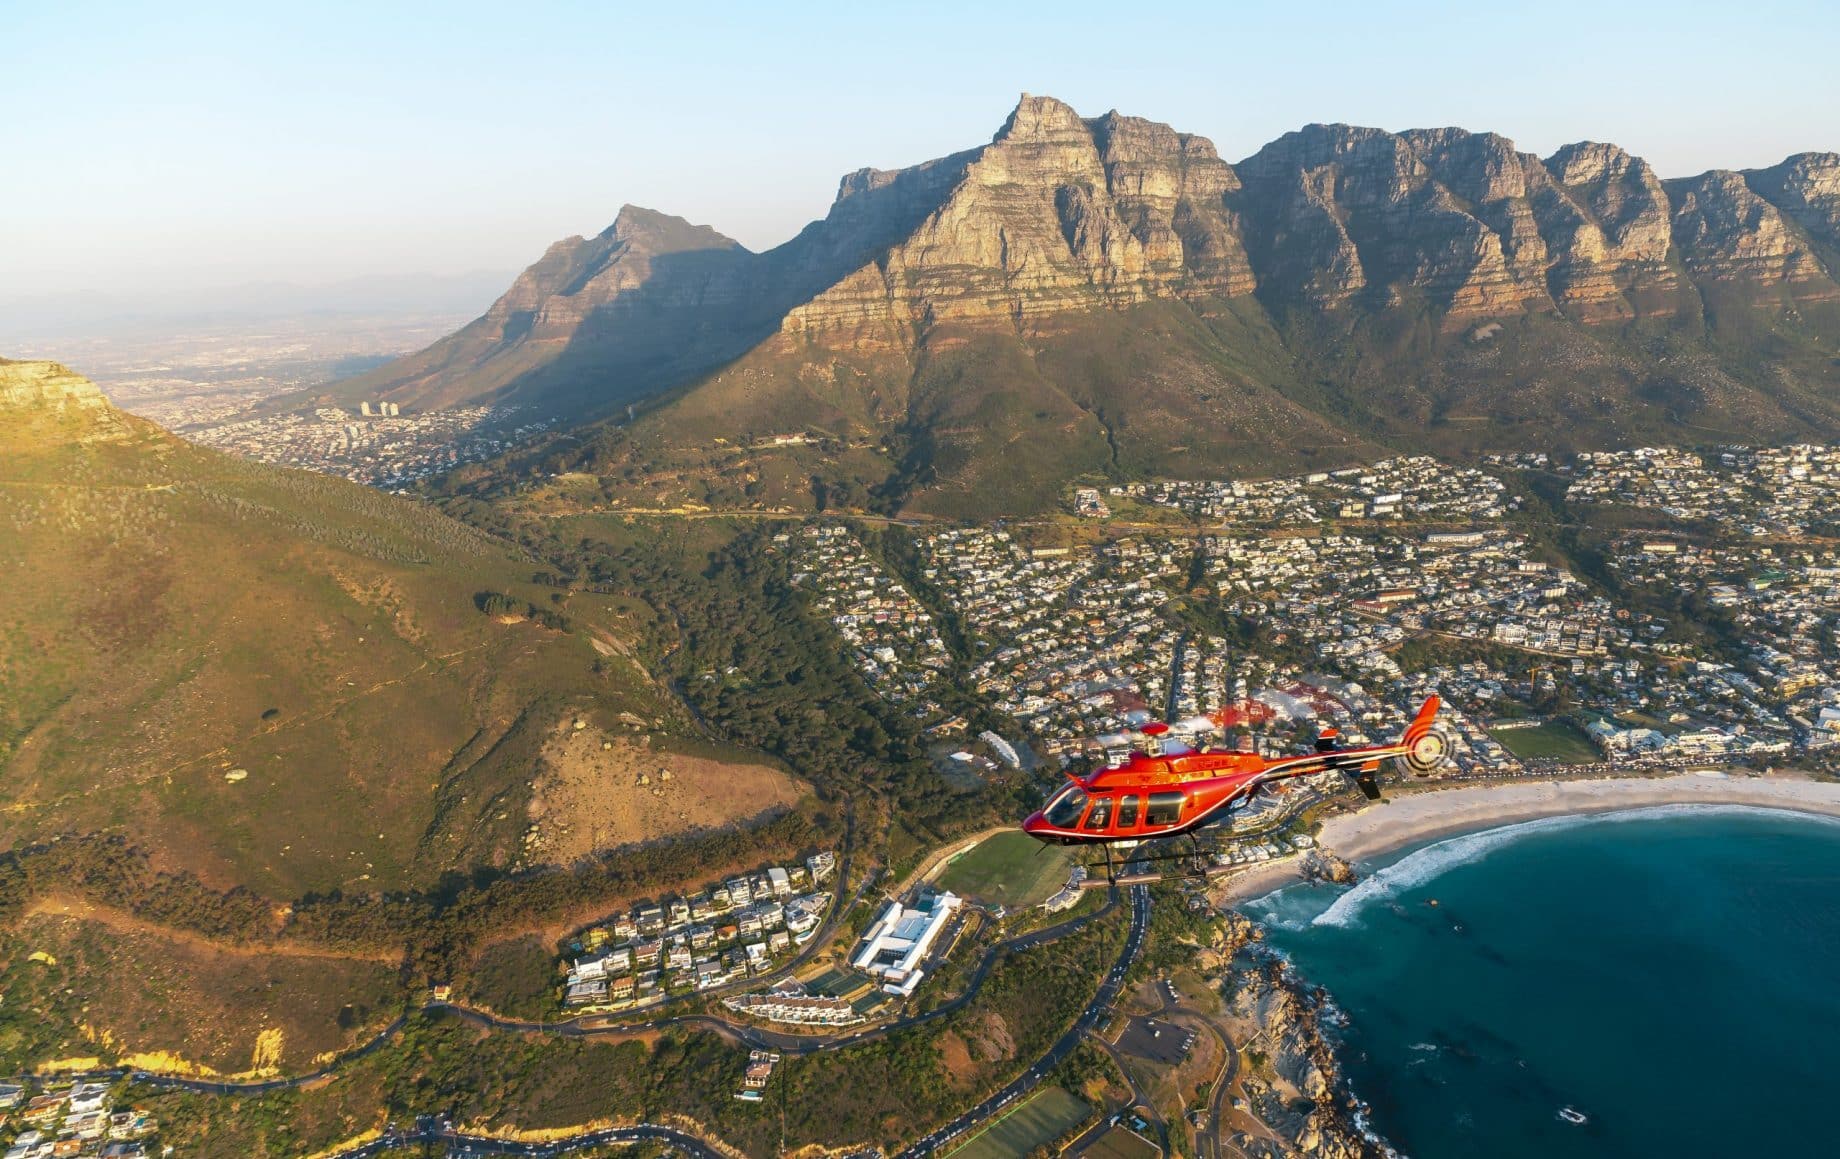 A helicopter over the ocean by Cape town